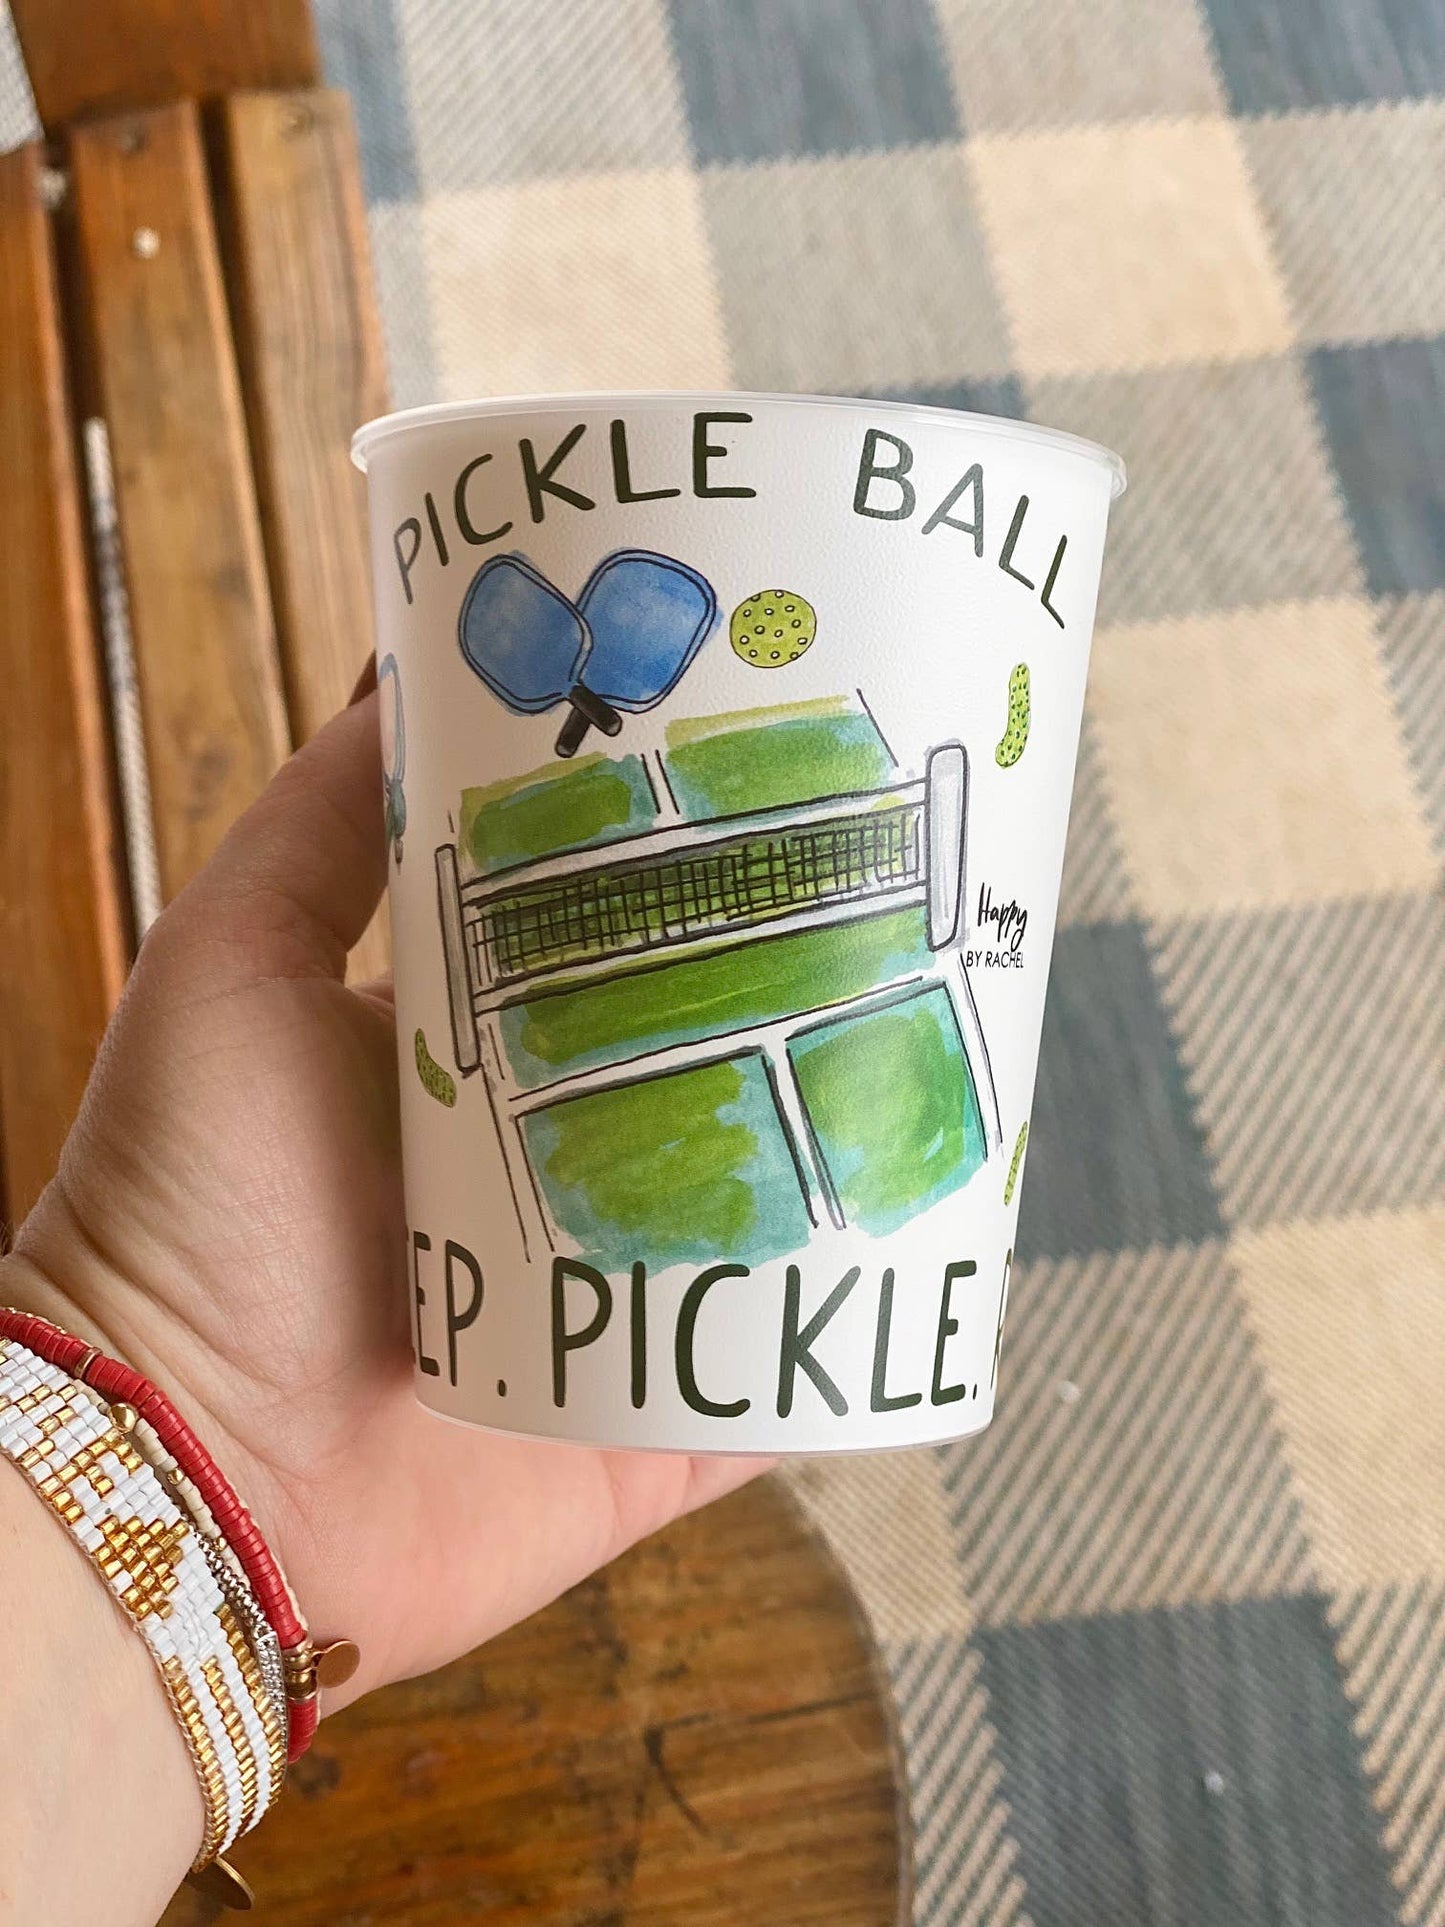 Pickle Ball Reusable Party Cups, gifts, fun cup